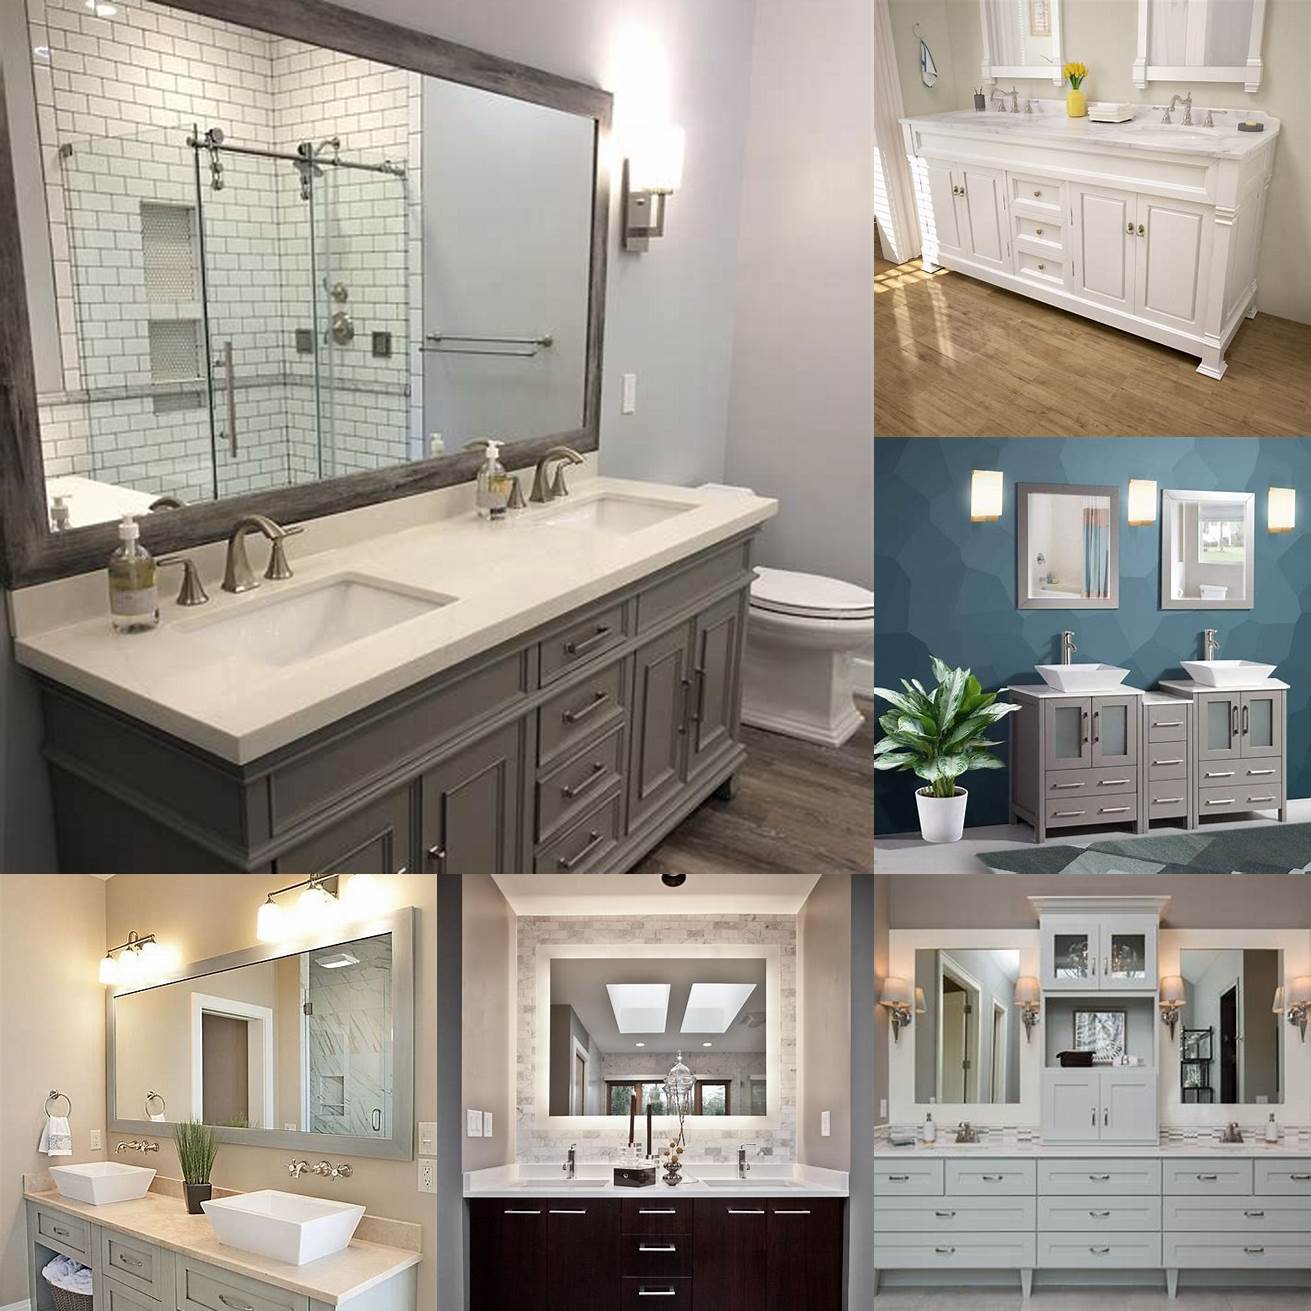 Double vanities Double vanities are ideal for larger bathrooms or for couples who need their own sink space